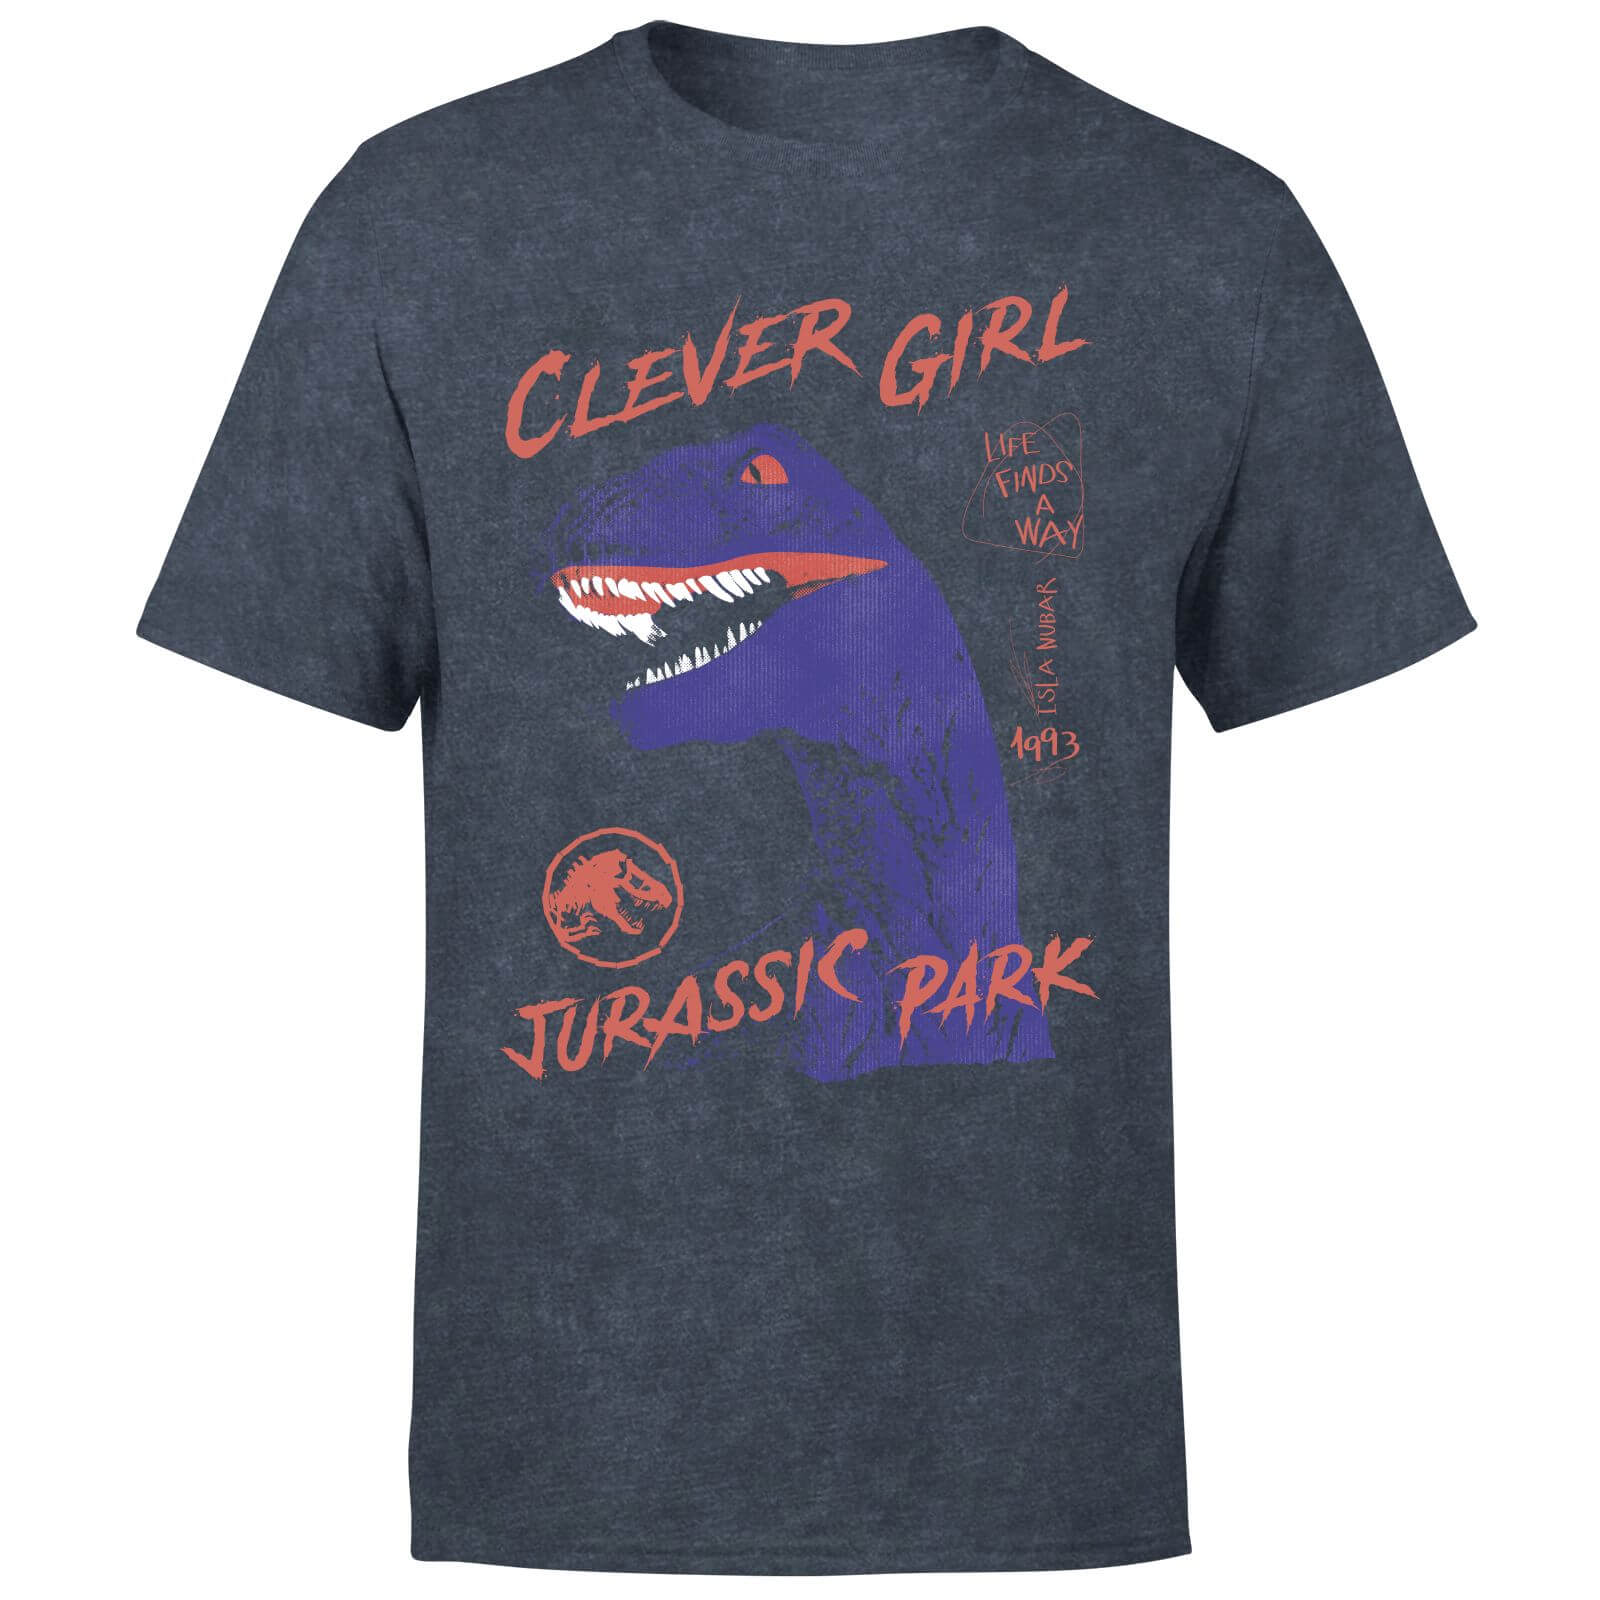 View the best prices for: jurassic park life finds a way raptor unisex t-shirt